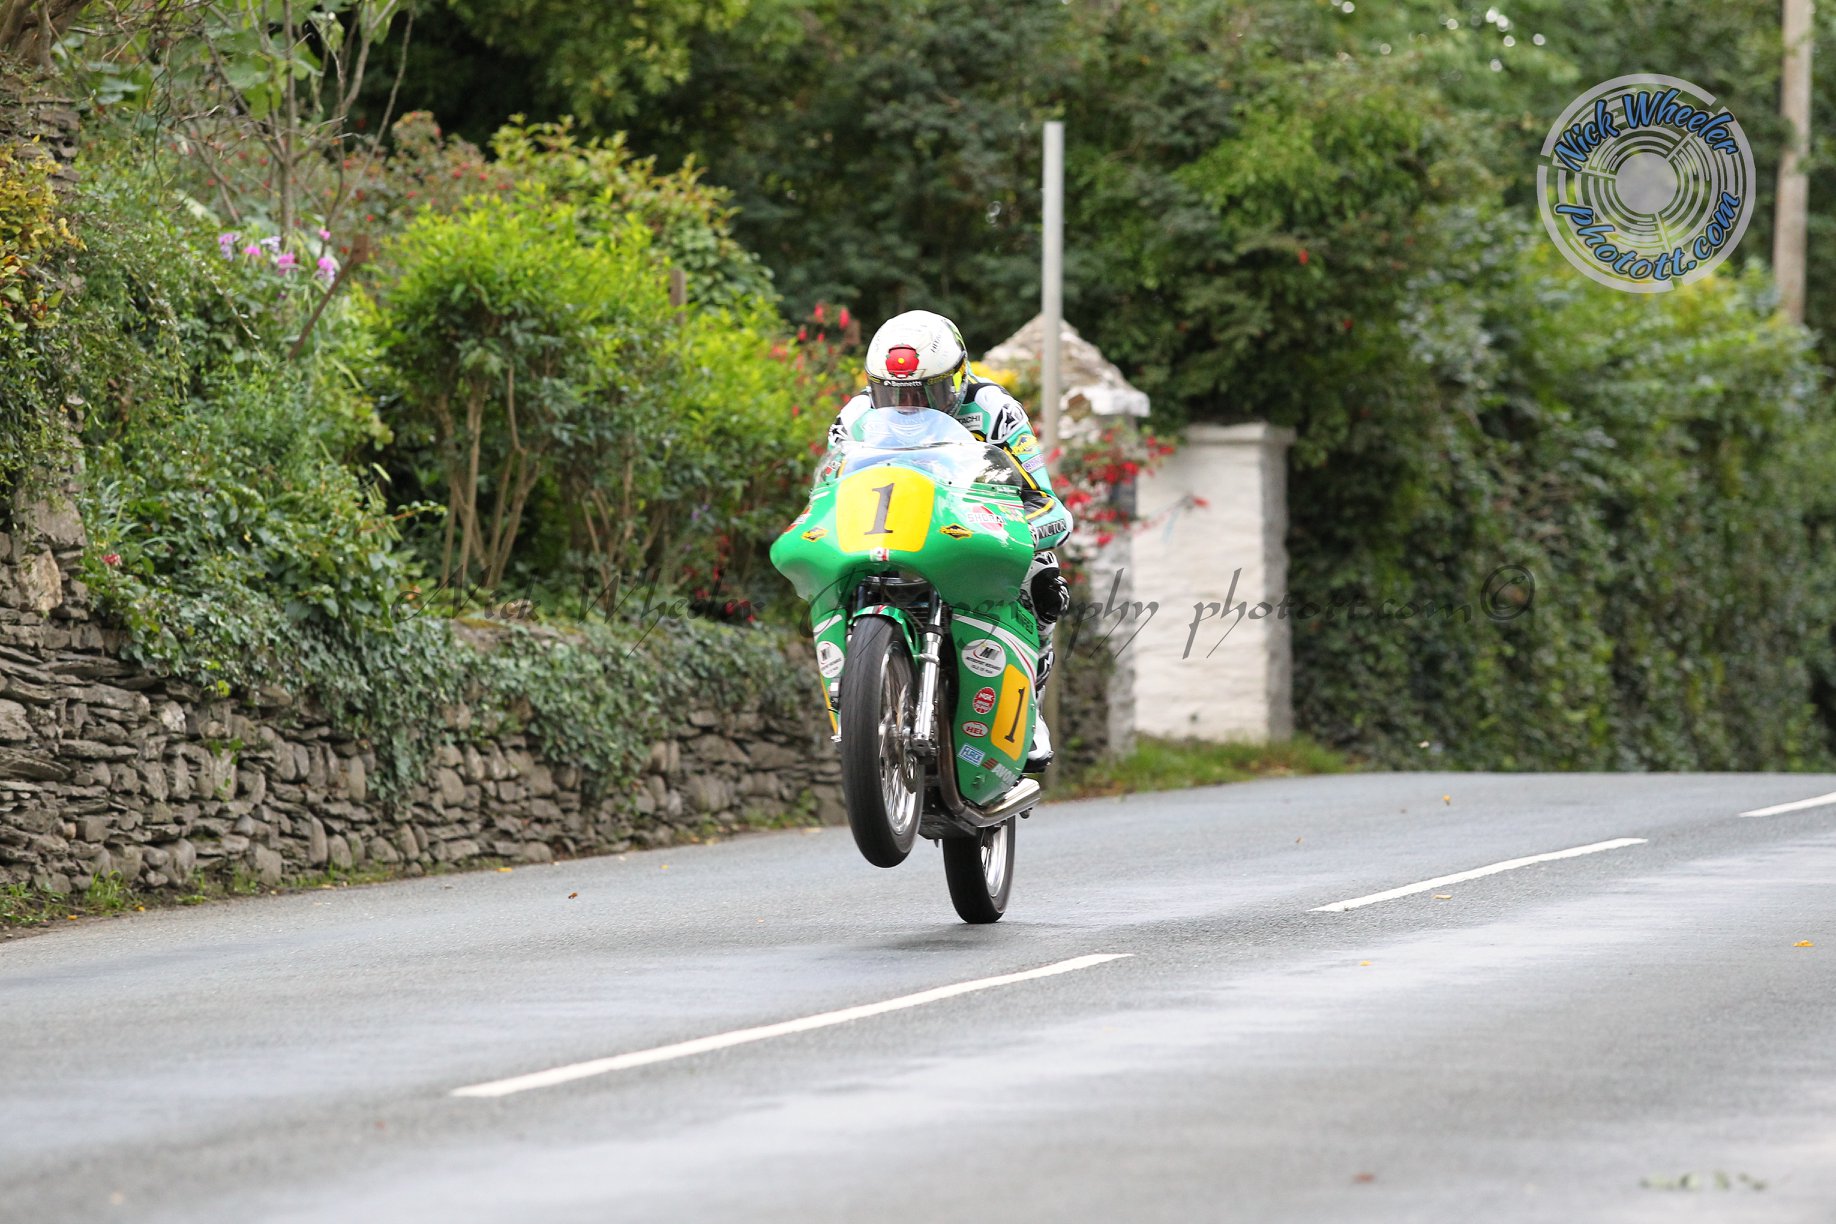 Classic TT: Prodigious Team Winfield/McGuinness Combination Remains In Place